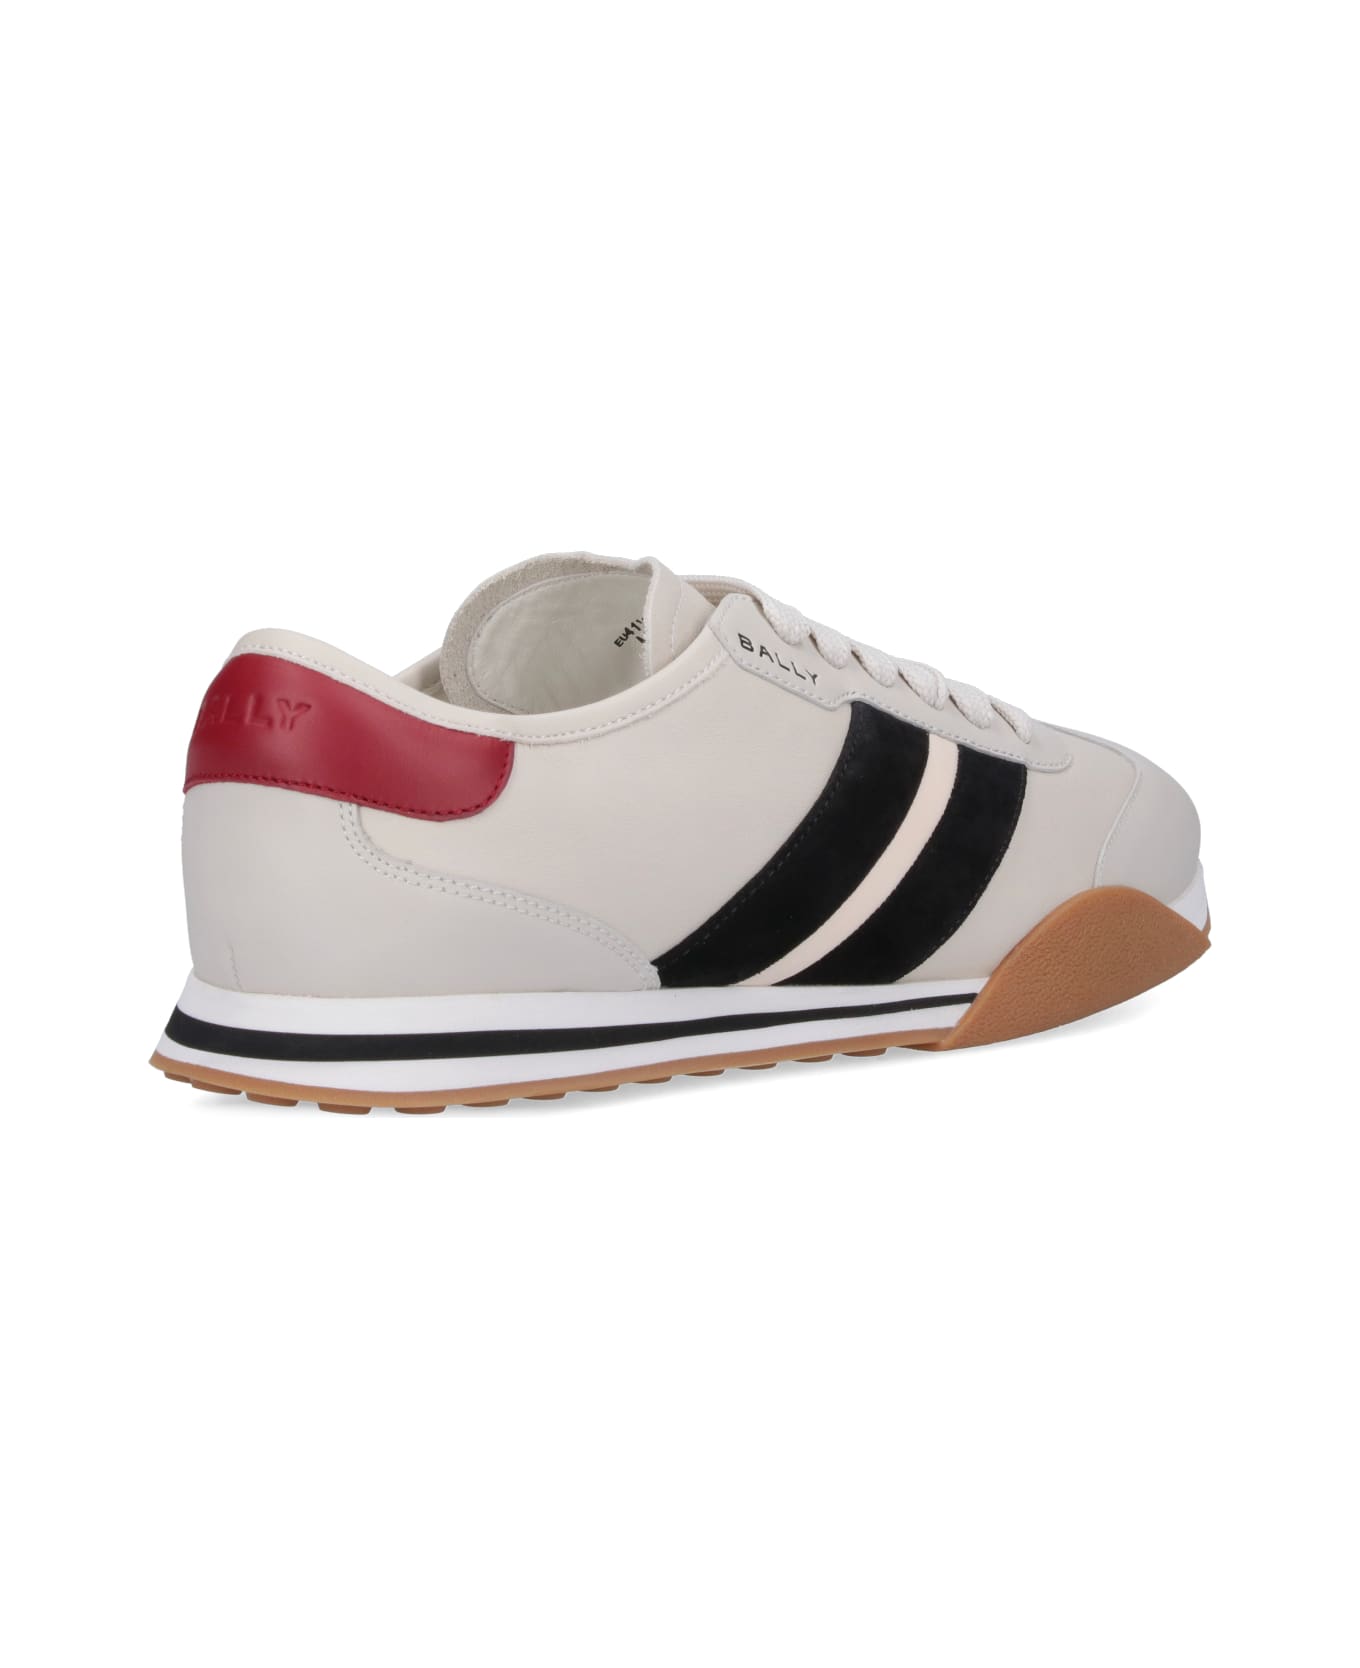 Bally "stewy" Sneakers - Crema